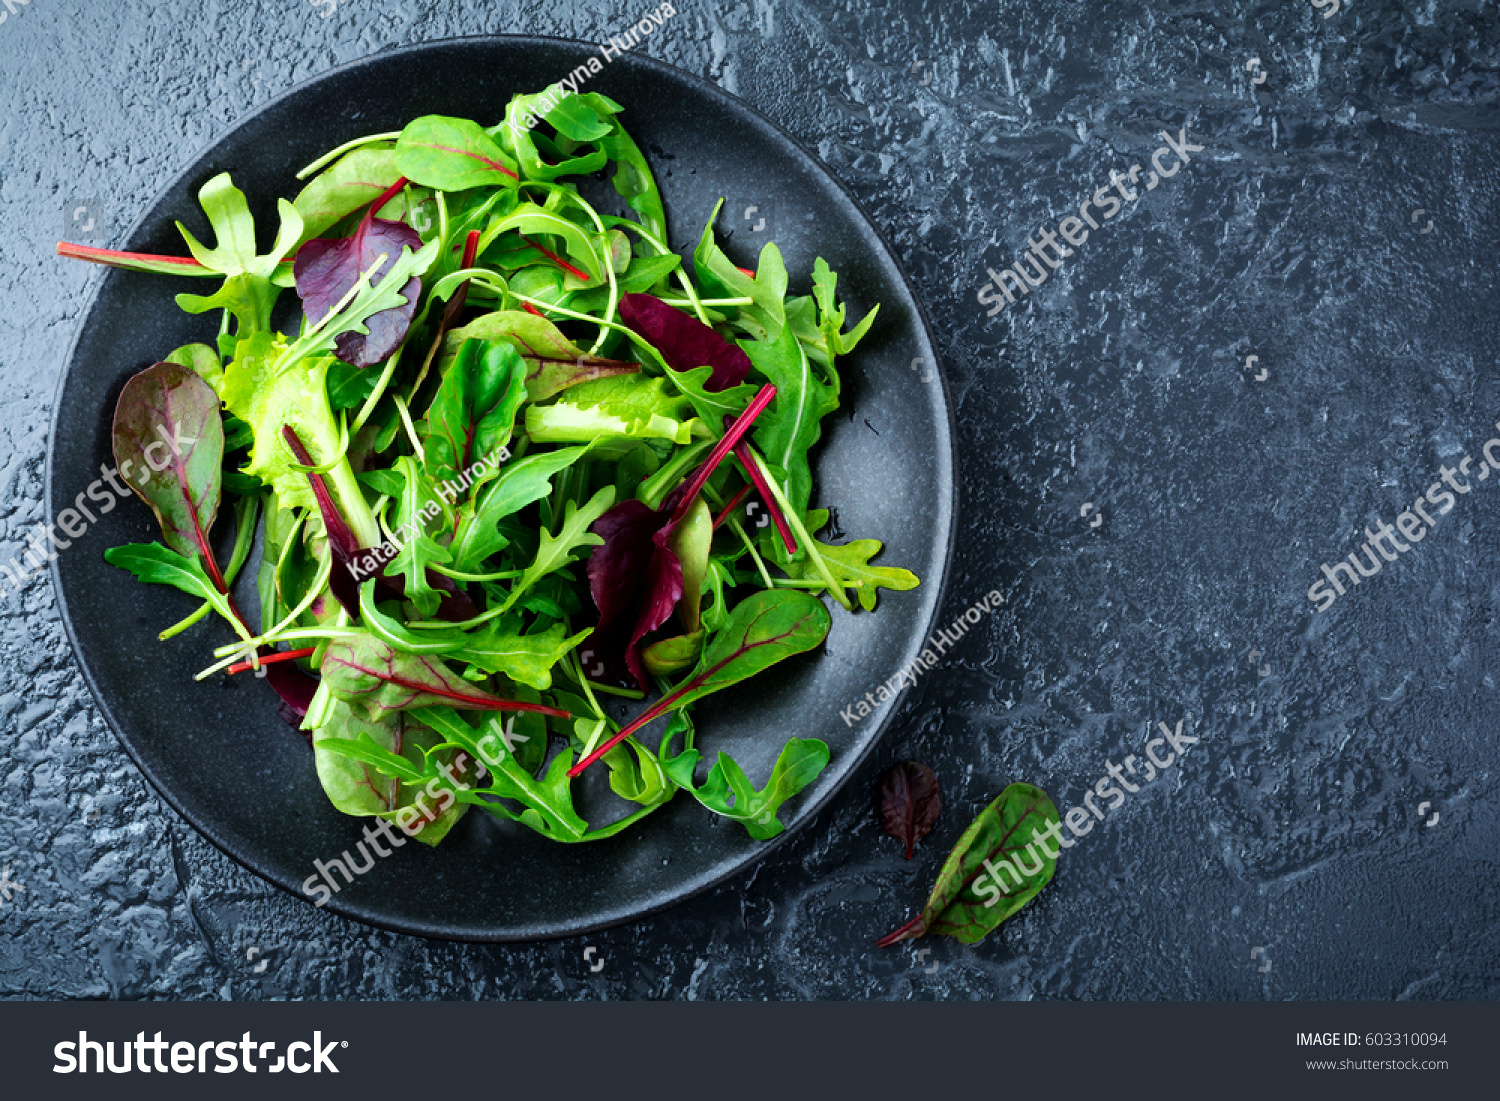 Mix fresh leaves of arugula, lettuce, spinach, beets for salad on a dark stone background. Selective focus. #603310094